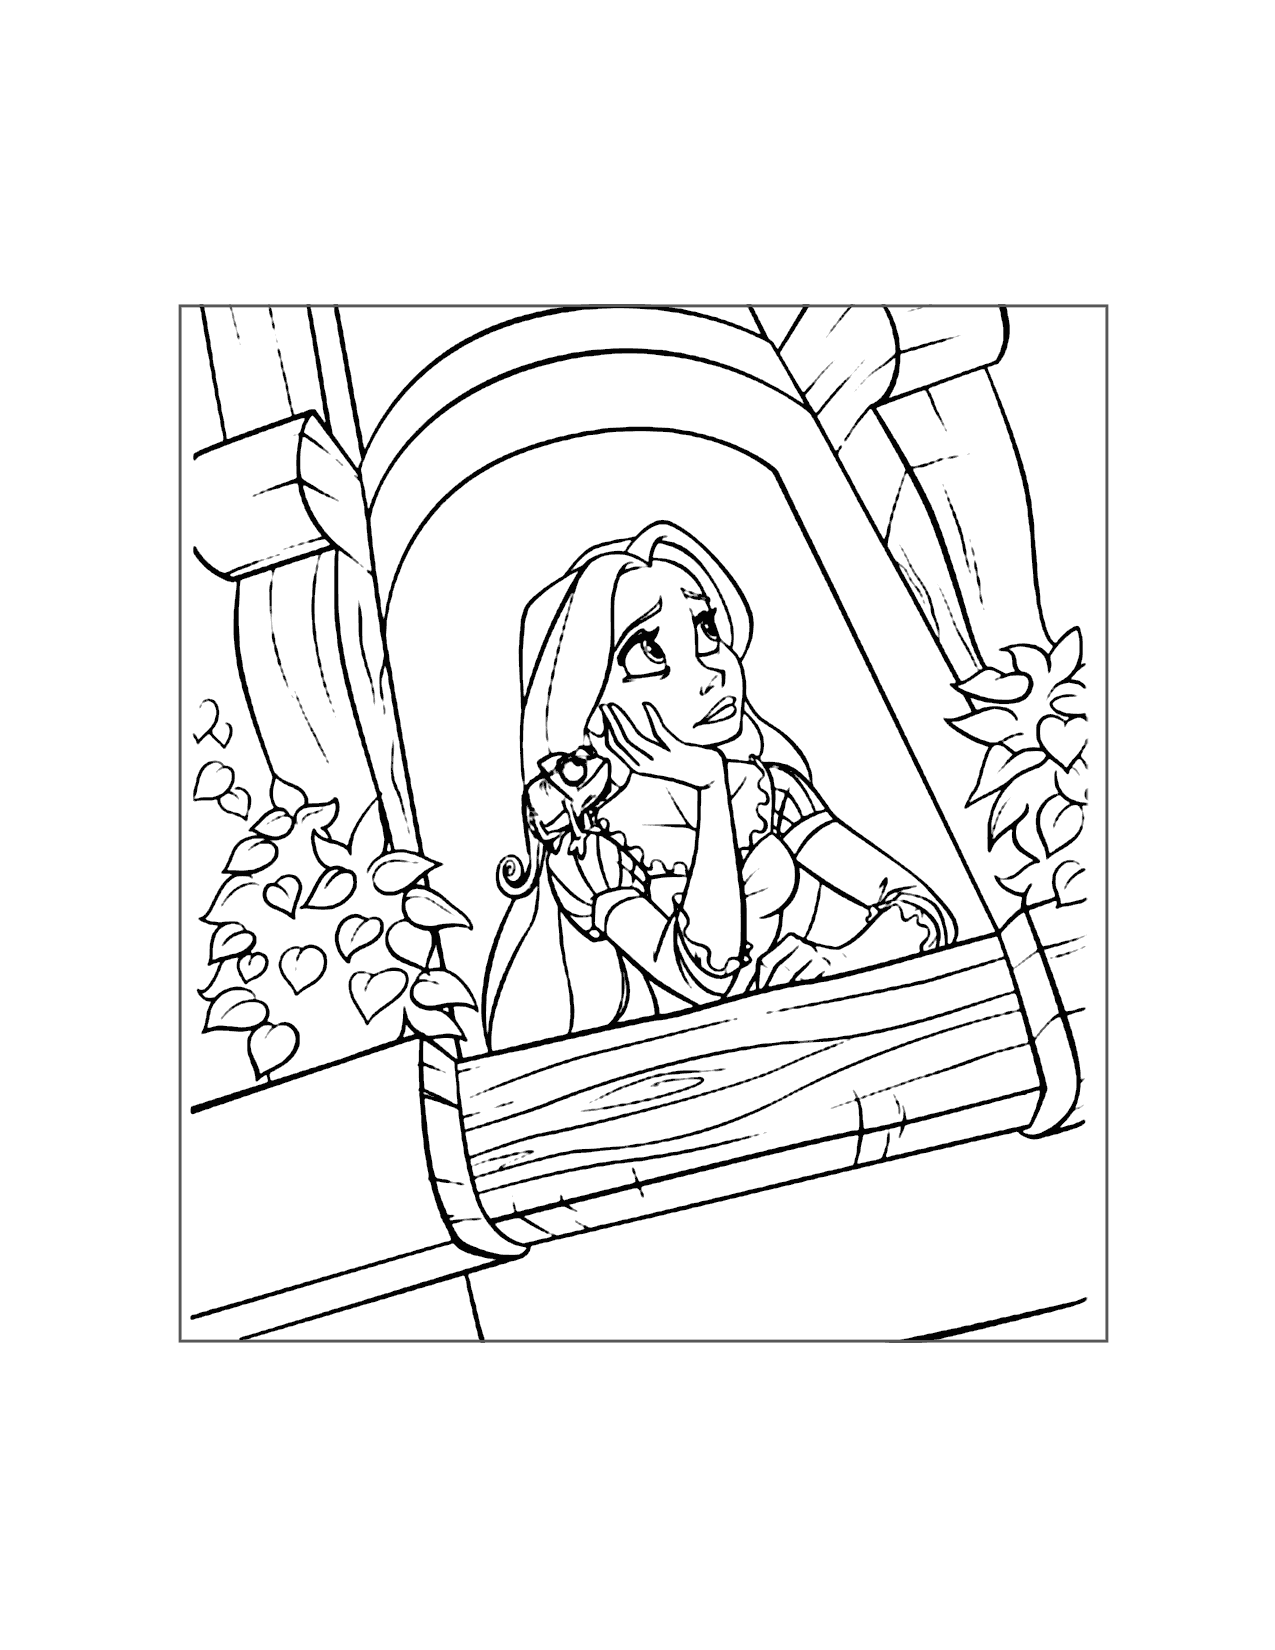 Rapunzel Looks Out Her Window Coloring Page